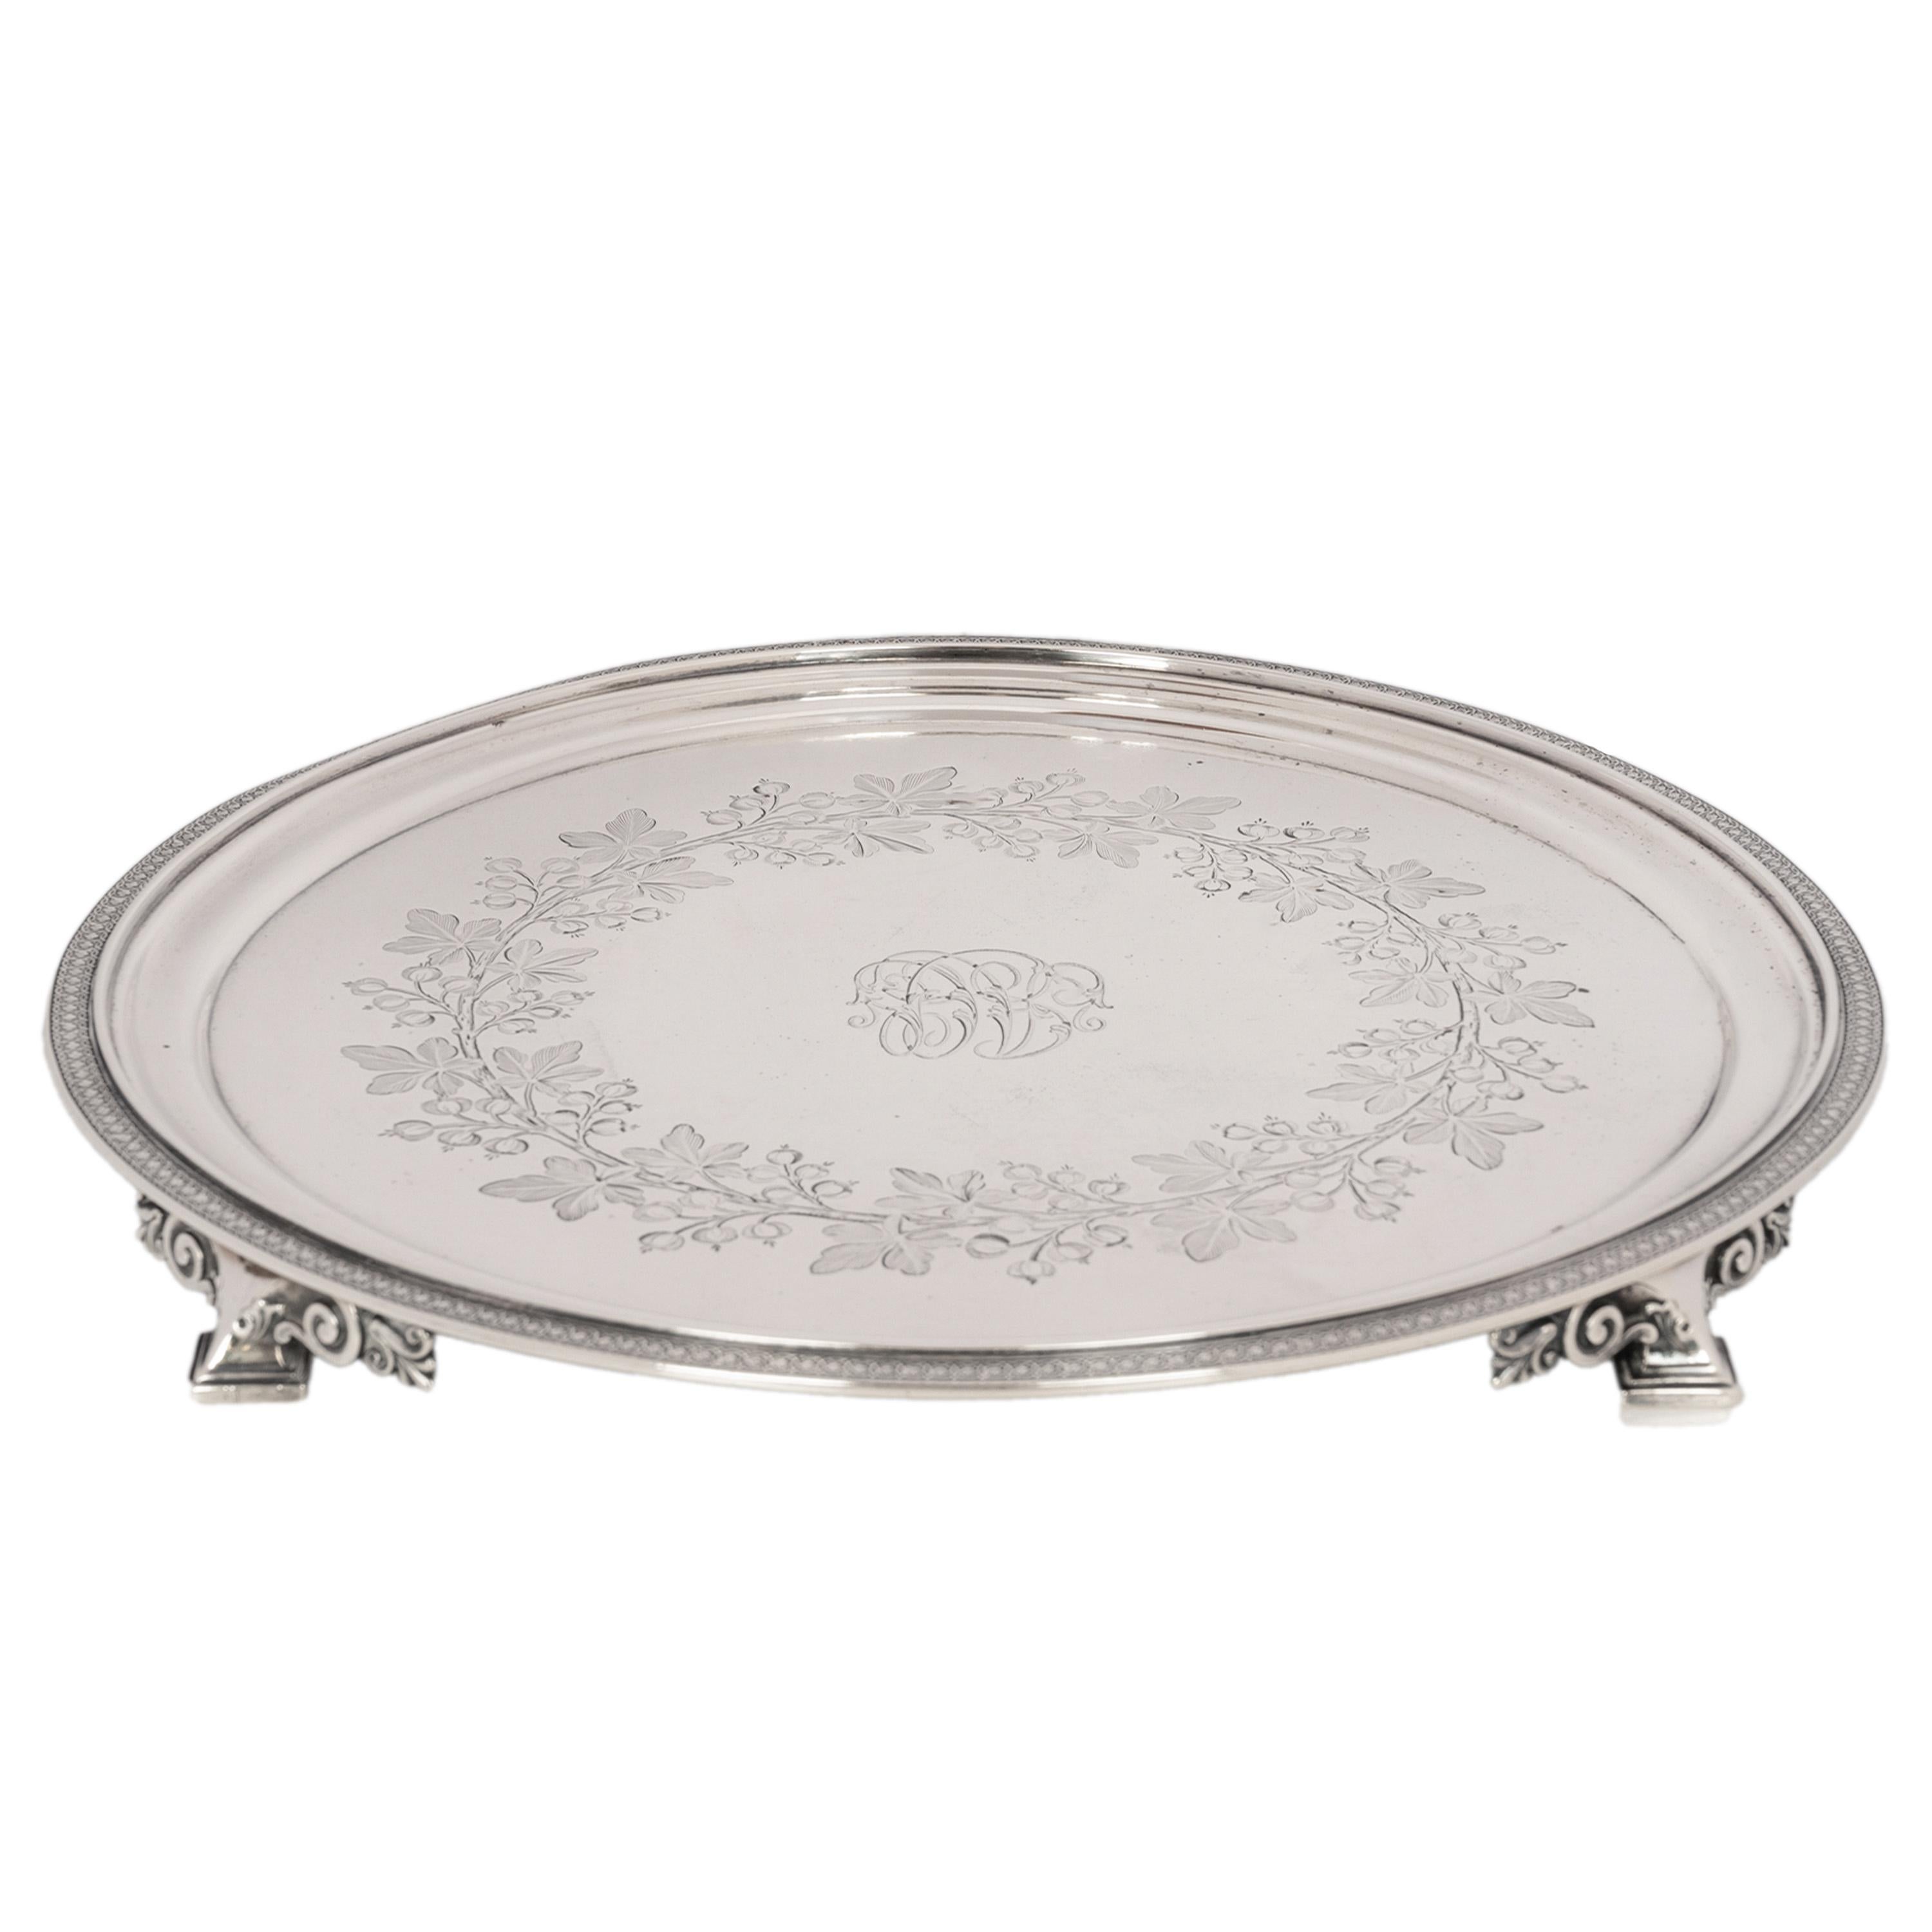 Antique Sterling Silver Graved Tiffany & Co Footed Salver Tray New York 1870 en vente 3